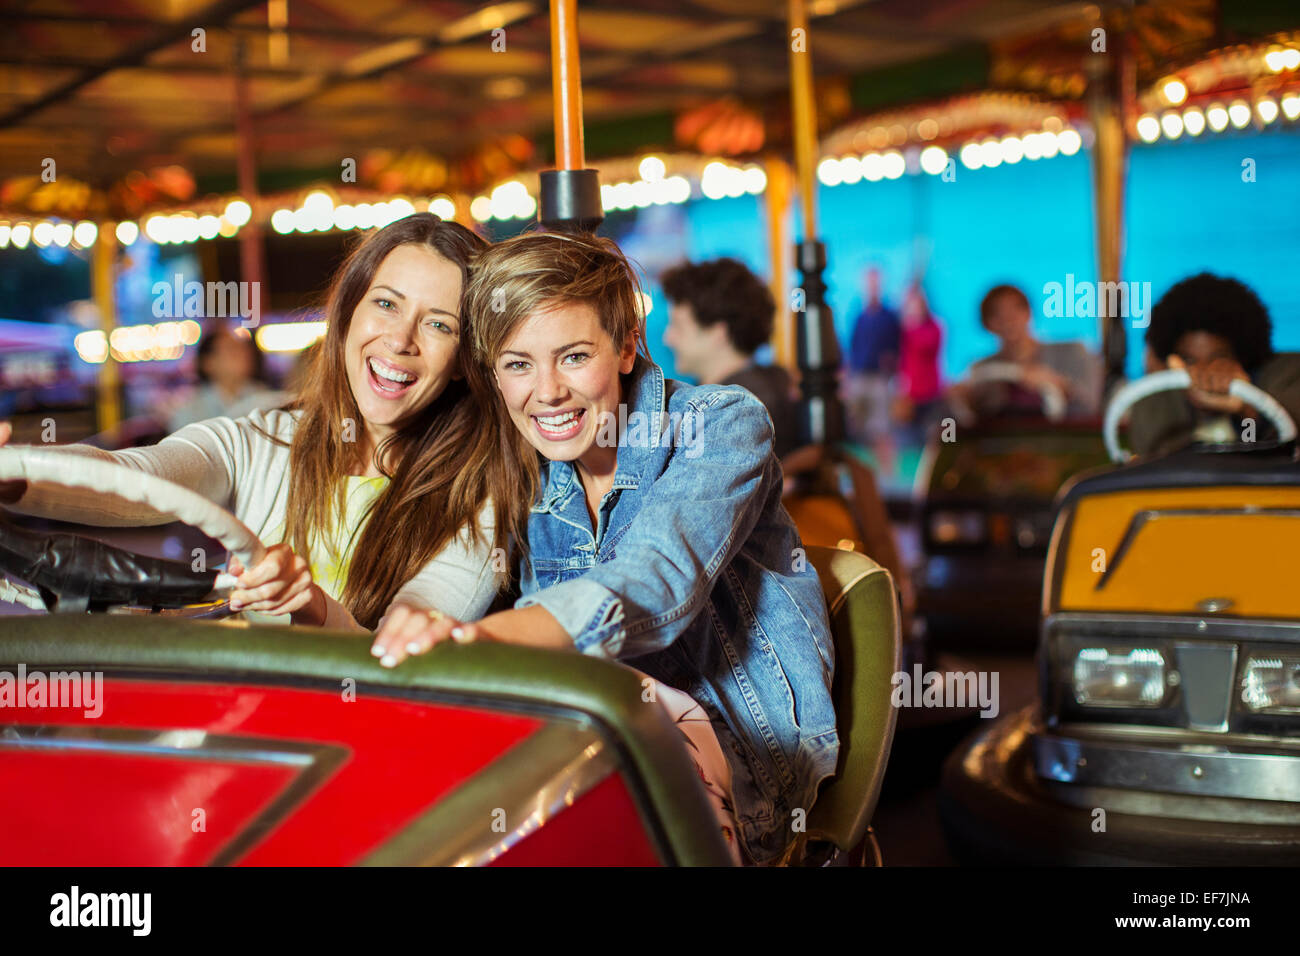 Two cheerful women on bumper car ride in amusement park Stock Photo